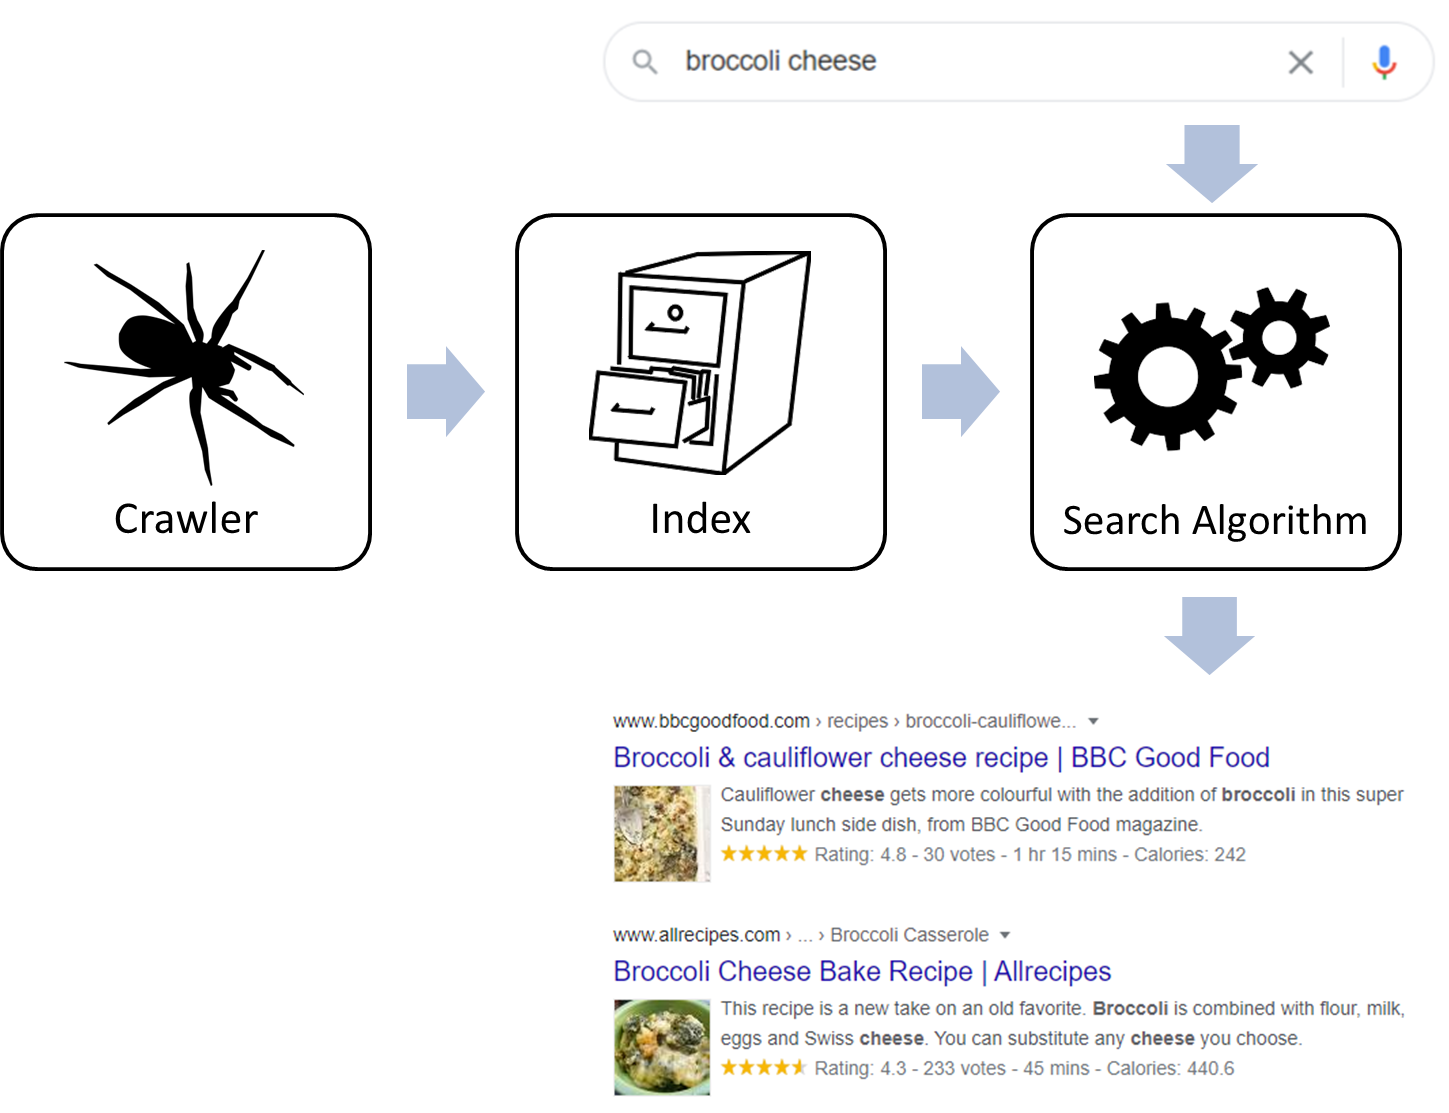 Search engines use a crawler to build an index.